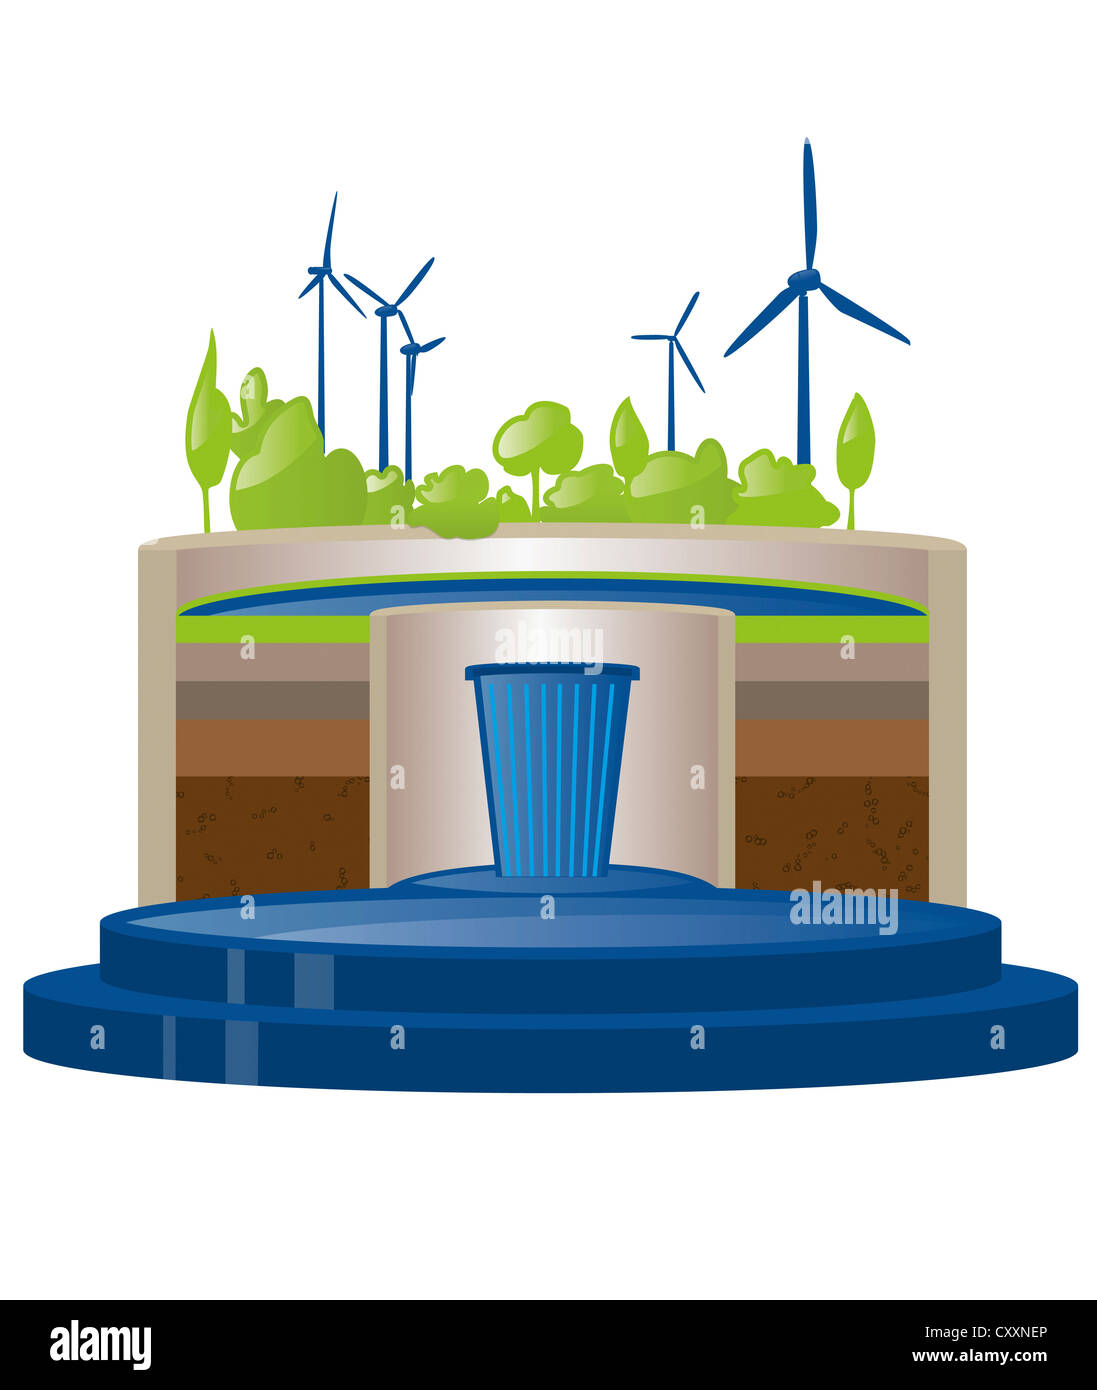 Hydropower and wind power, infographics, illustration Stock Photo